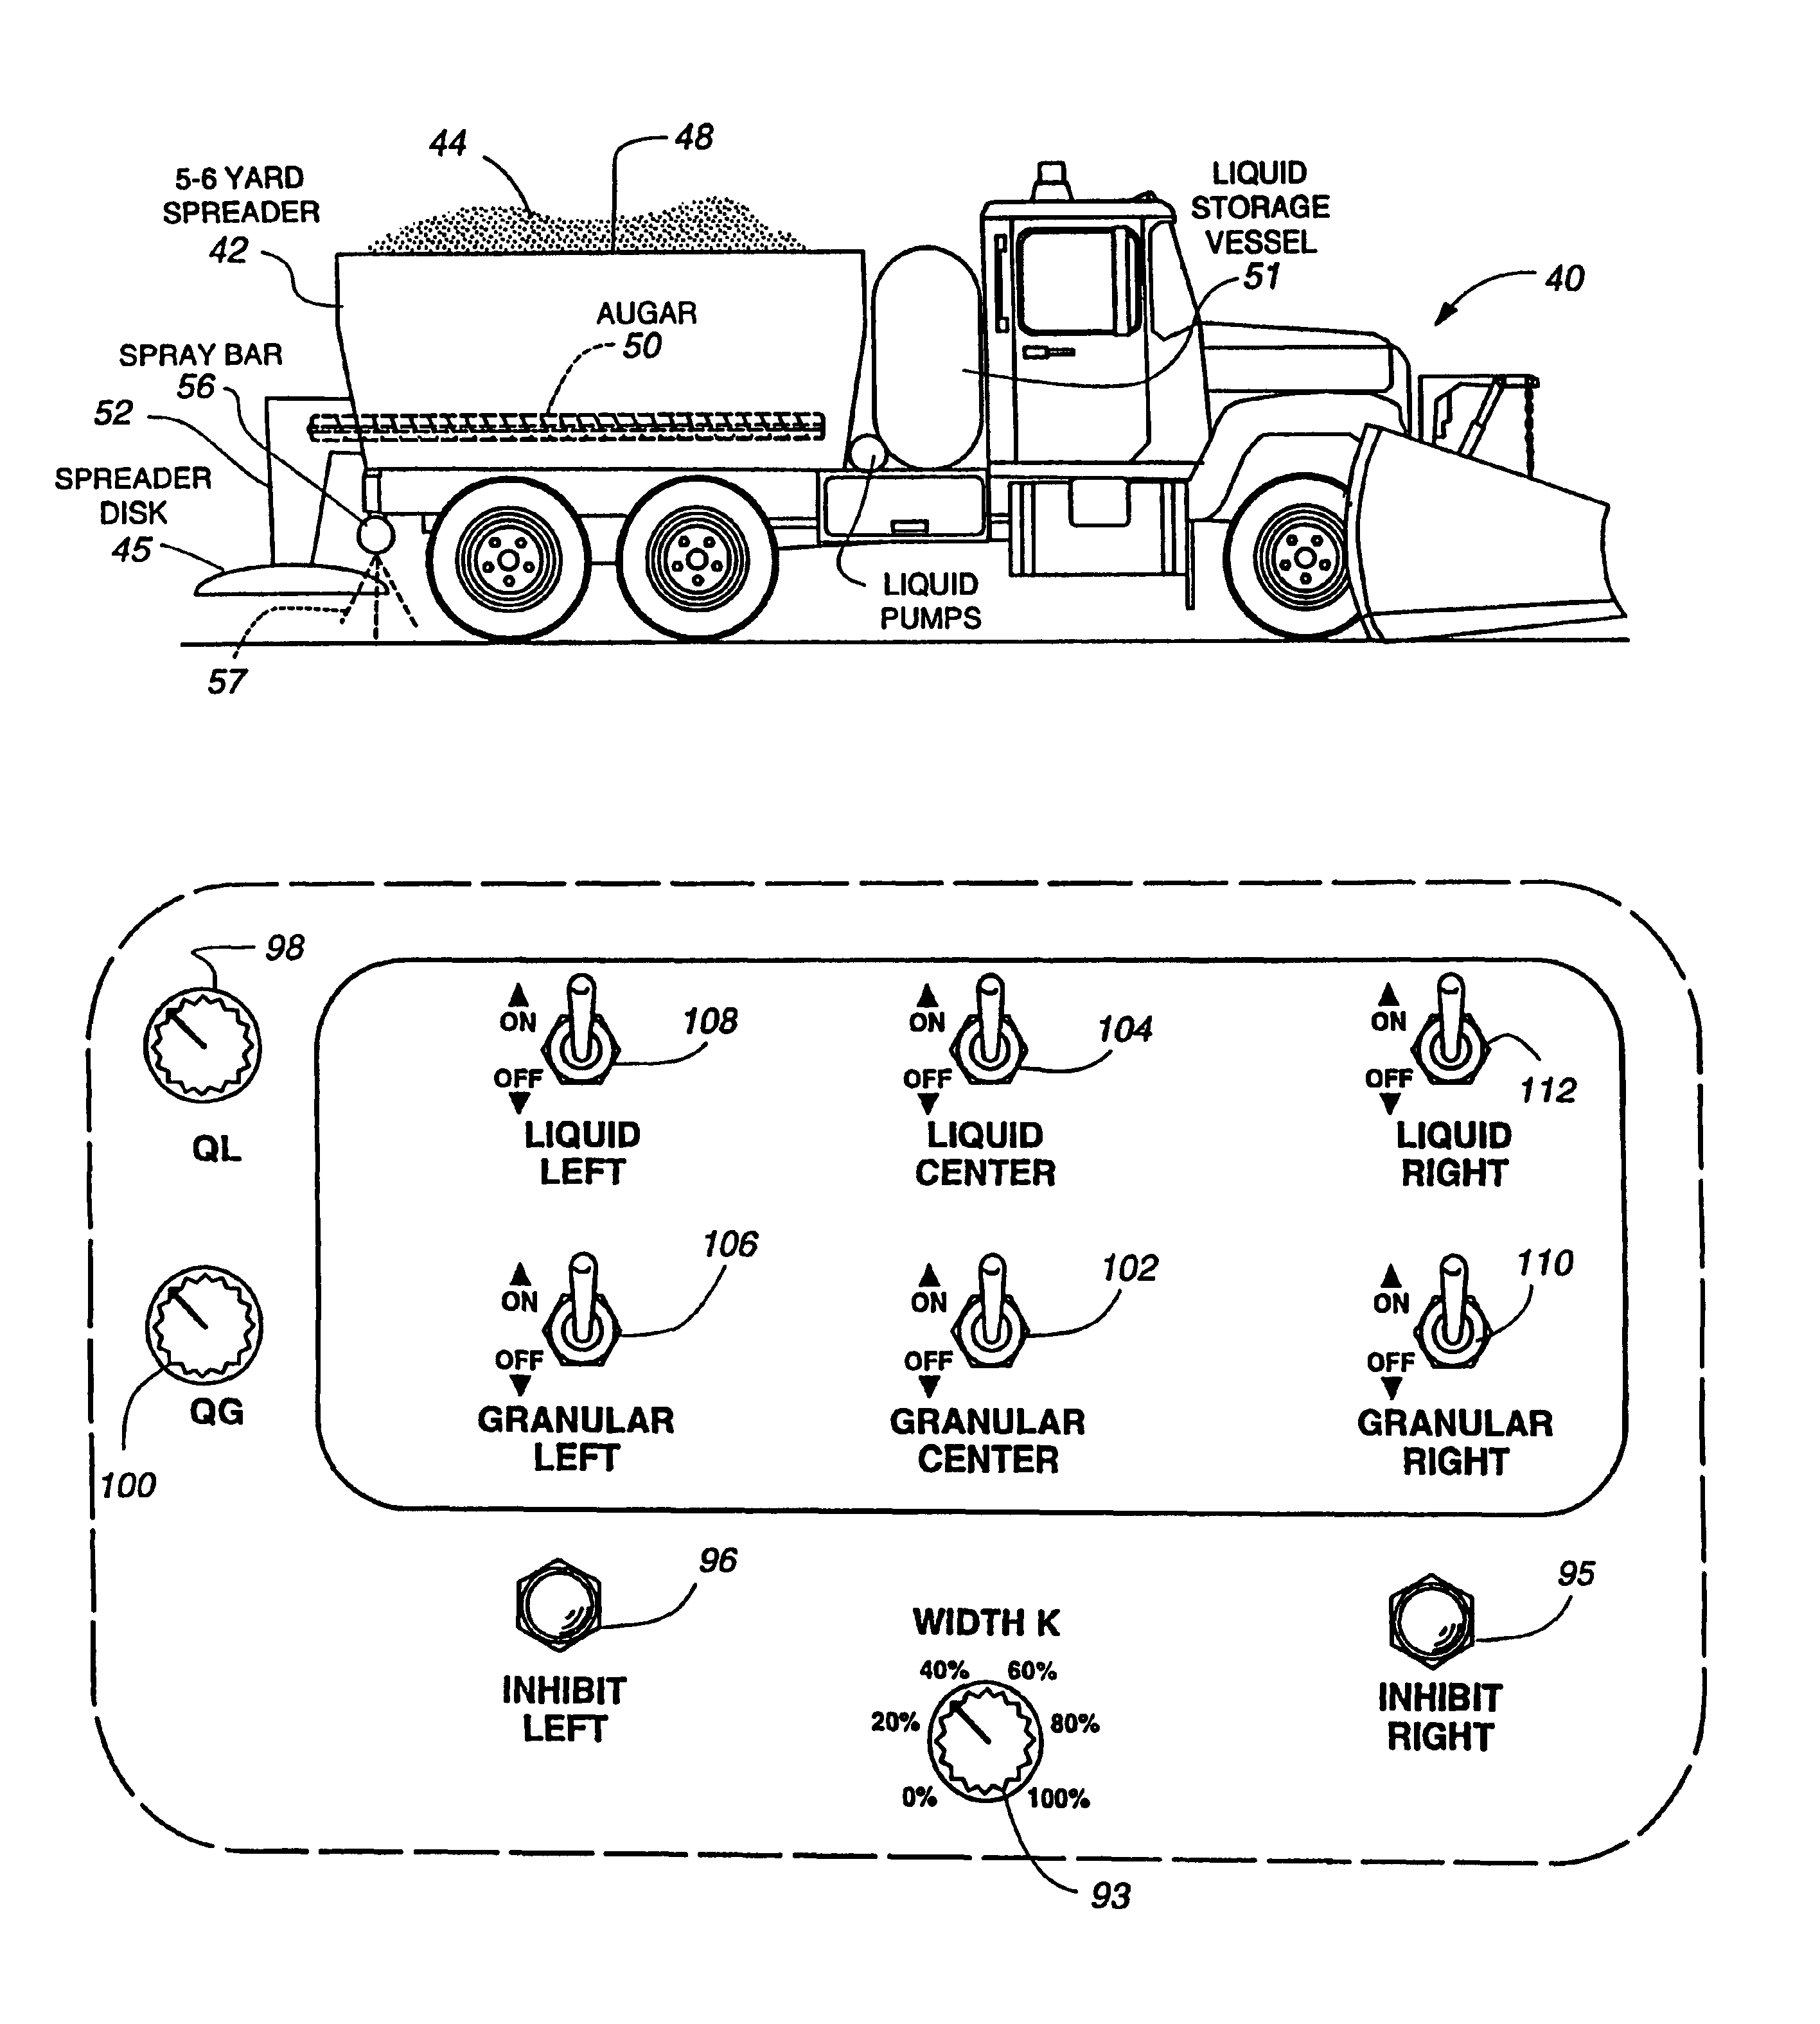 Apparatus and system for synchronized application of one or more materials to a surface from a vehicle and control of a vehicle mounted variable position snow removal device